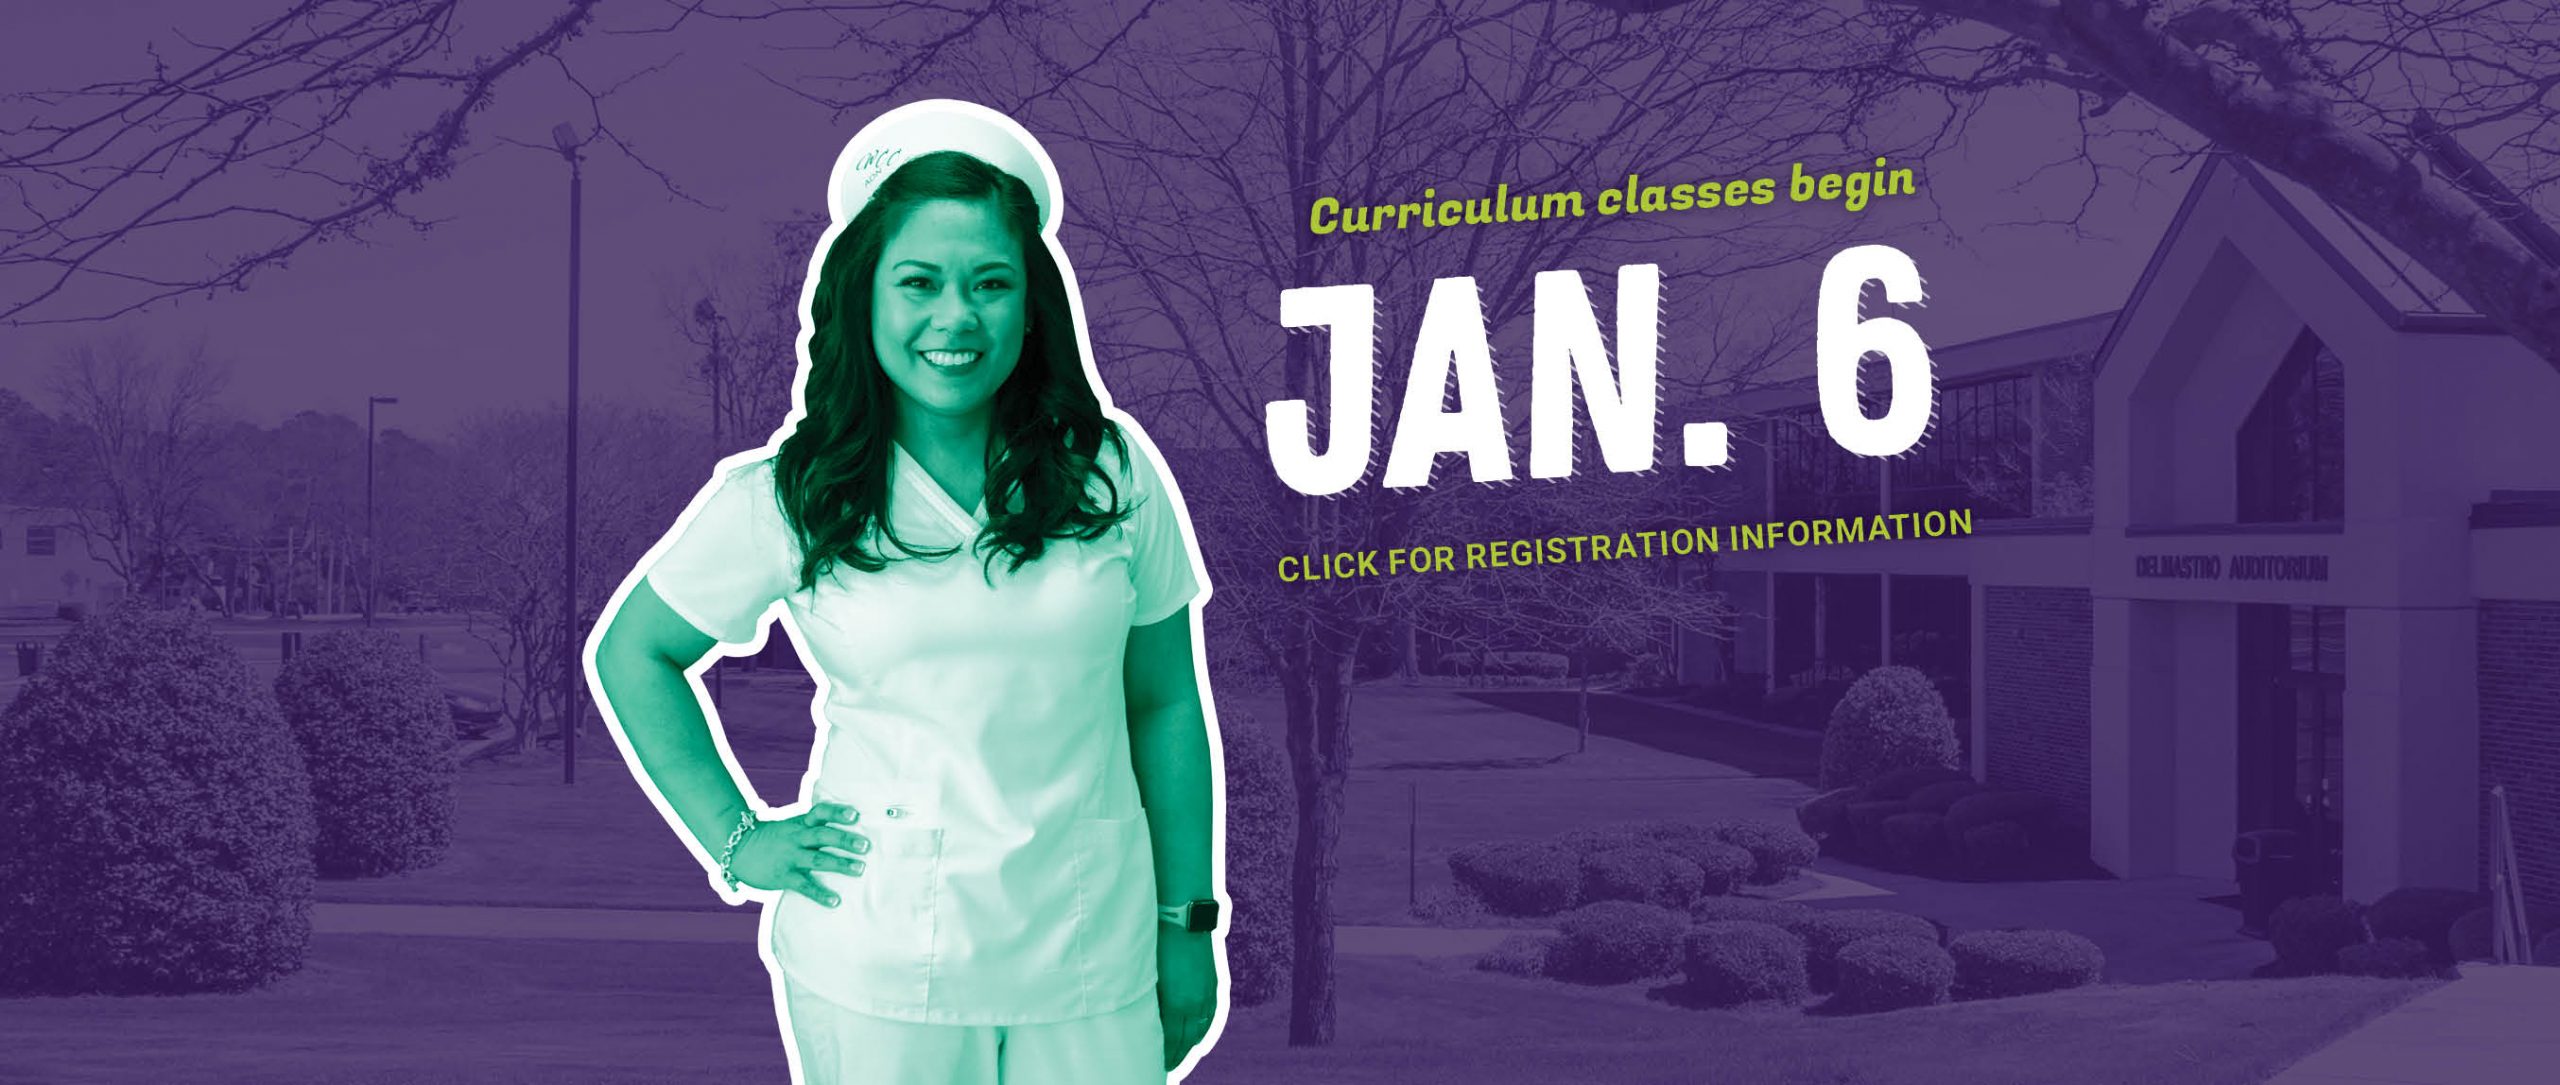 Curriculum classes begin January 6, Click for registration information